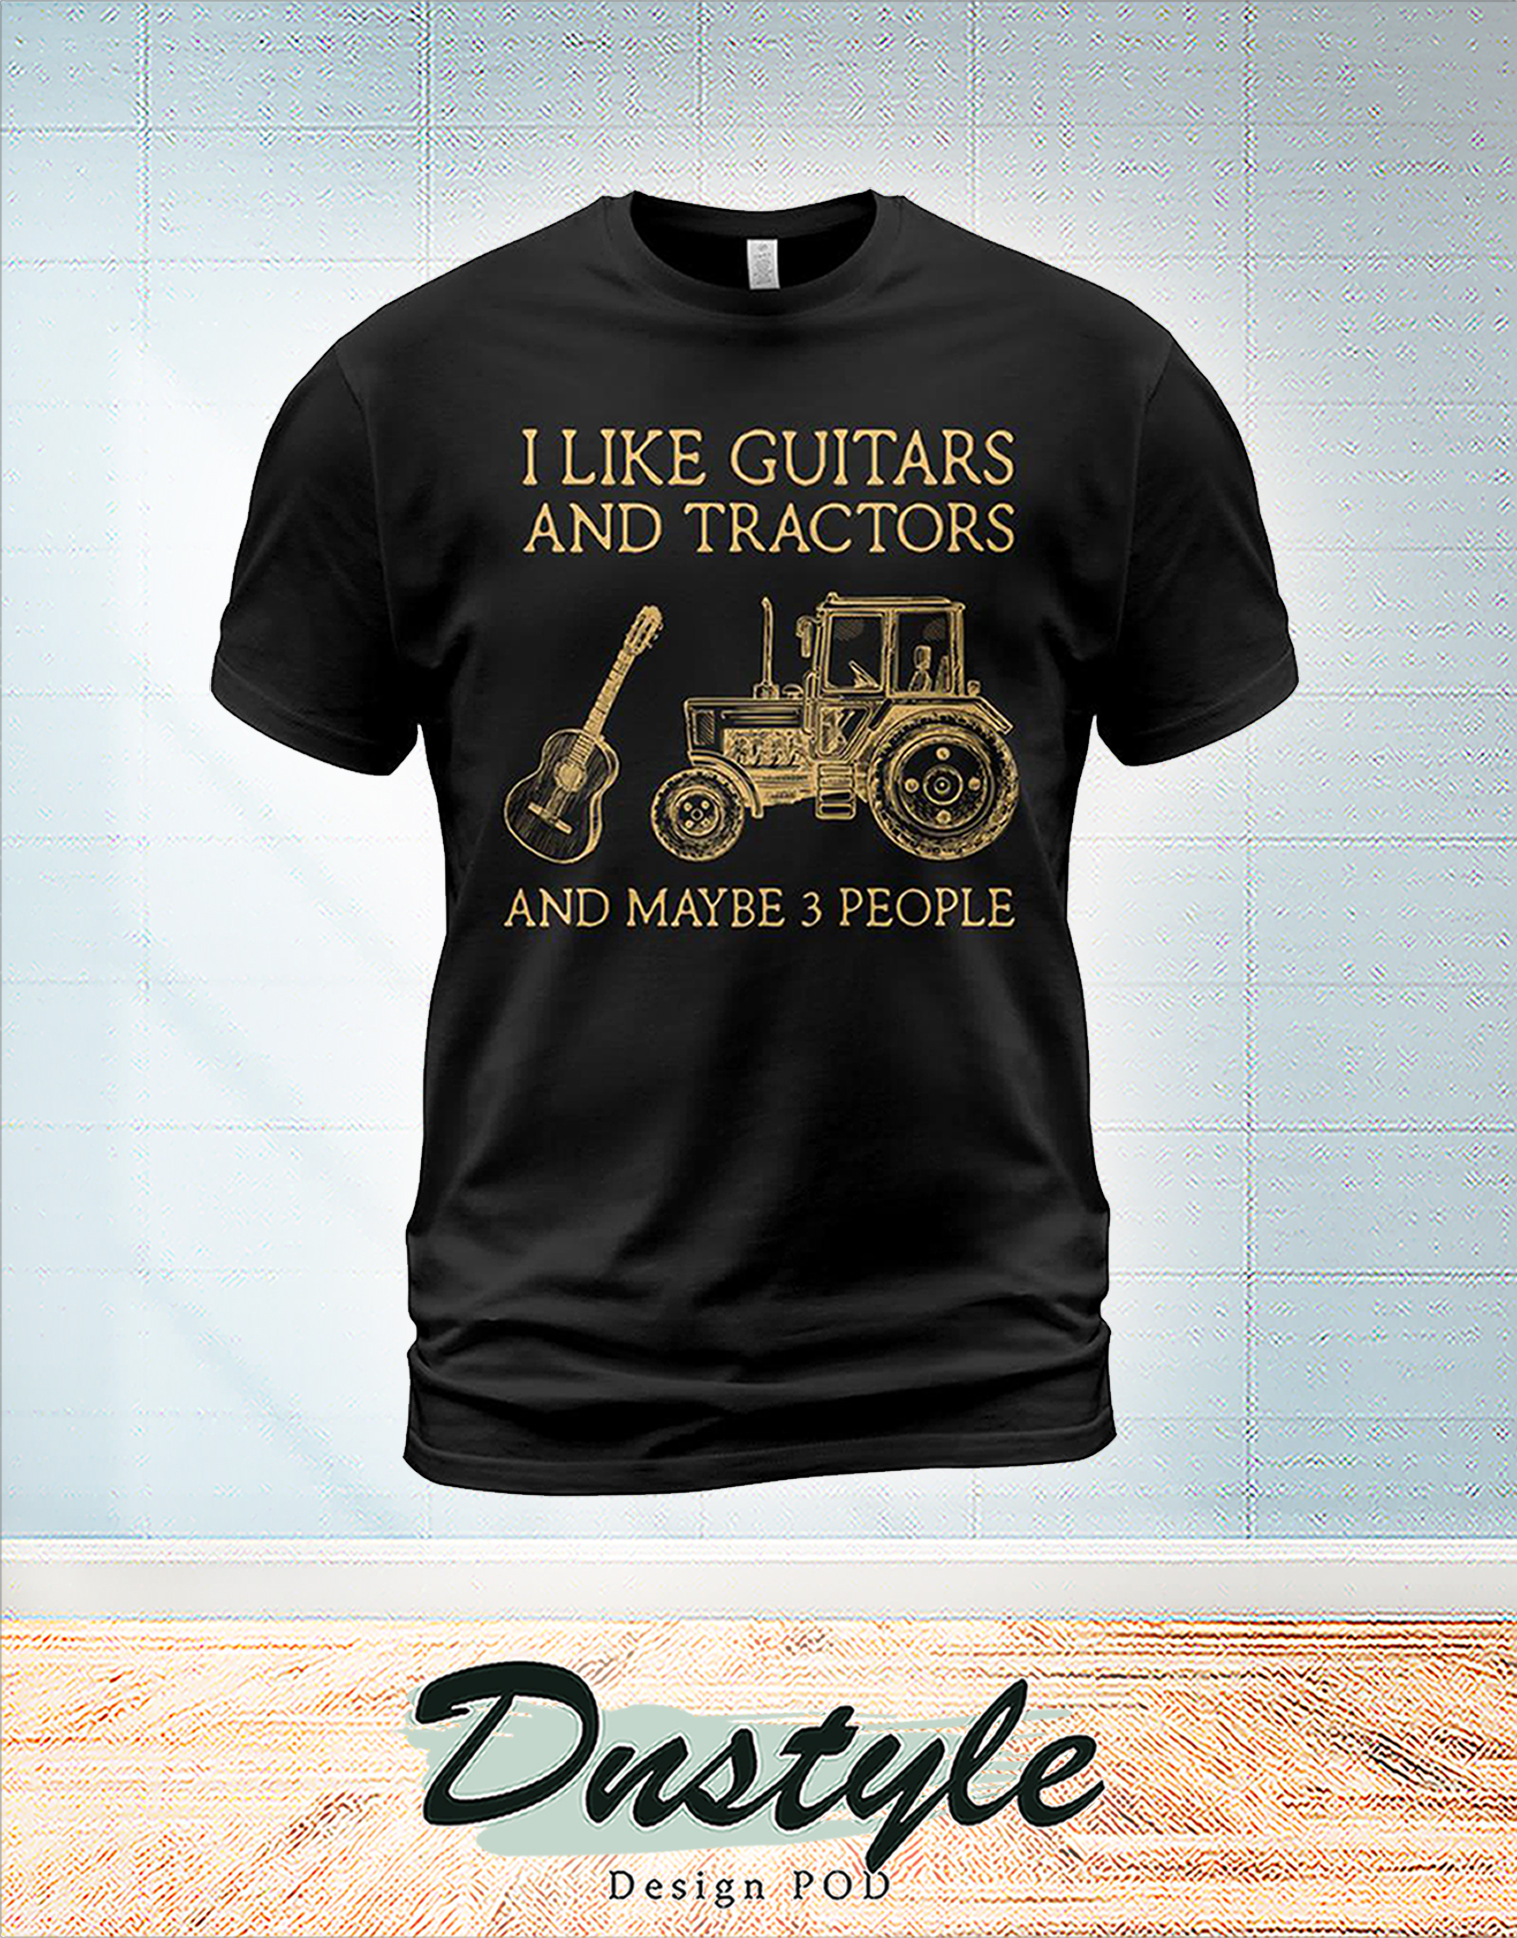 I like guitars and tractors and maybe 3 people t-shirt